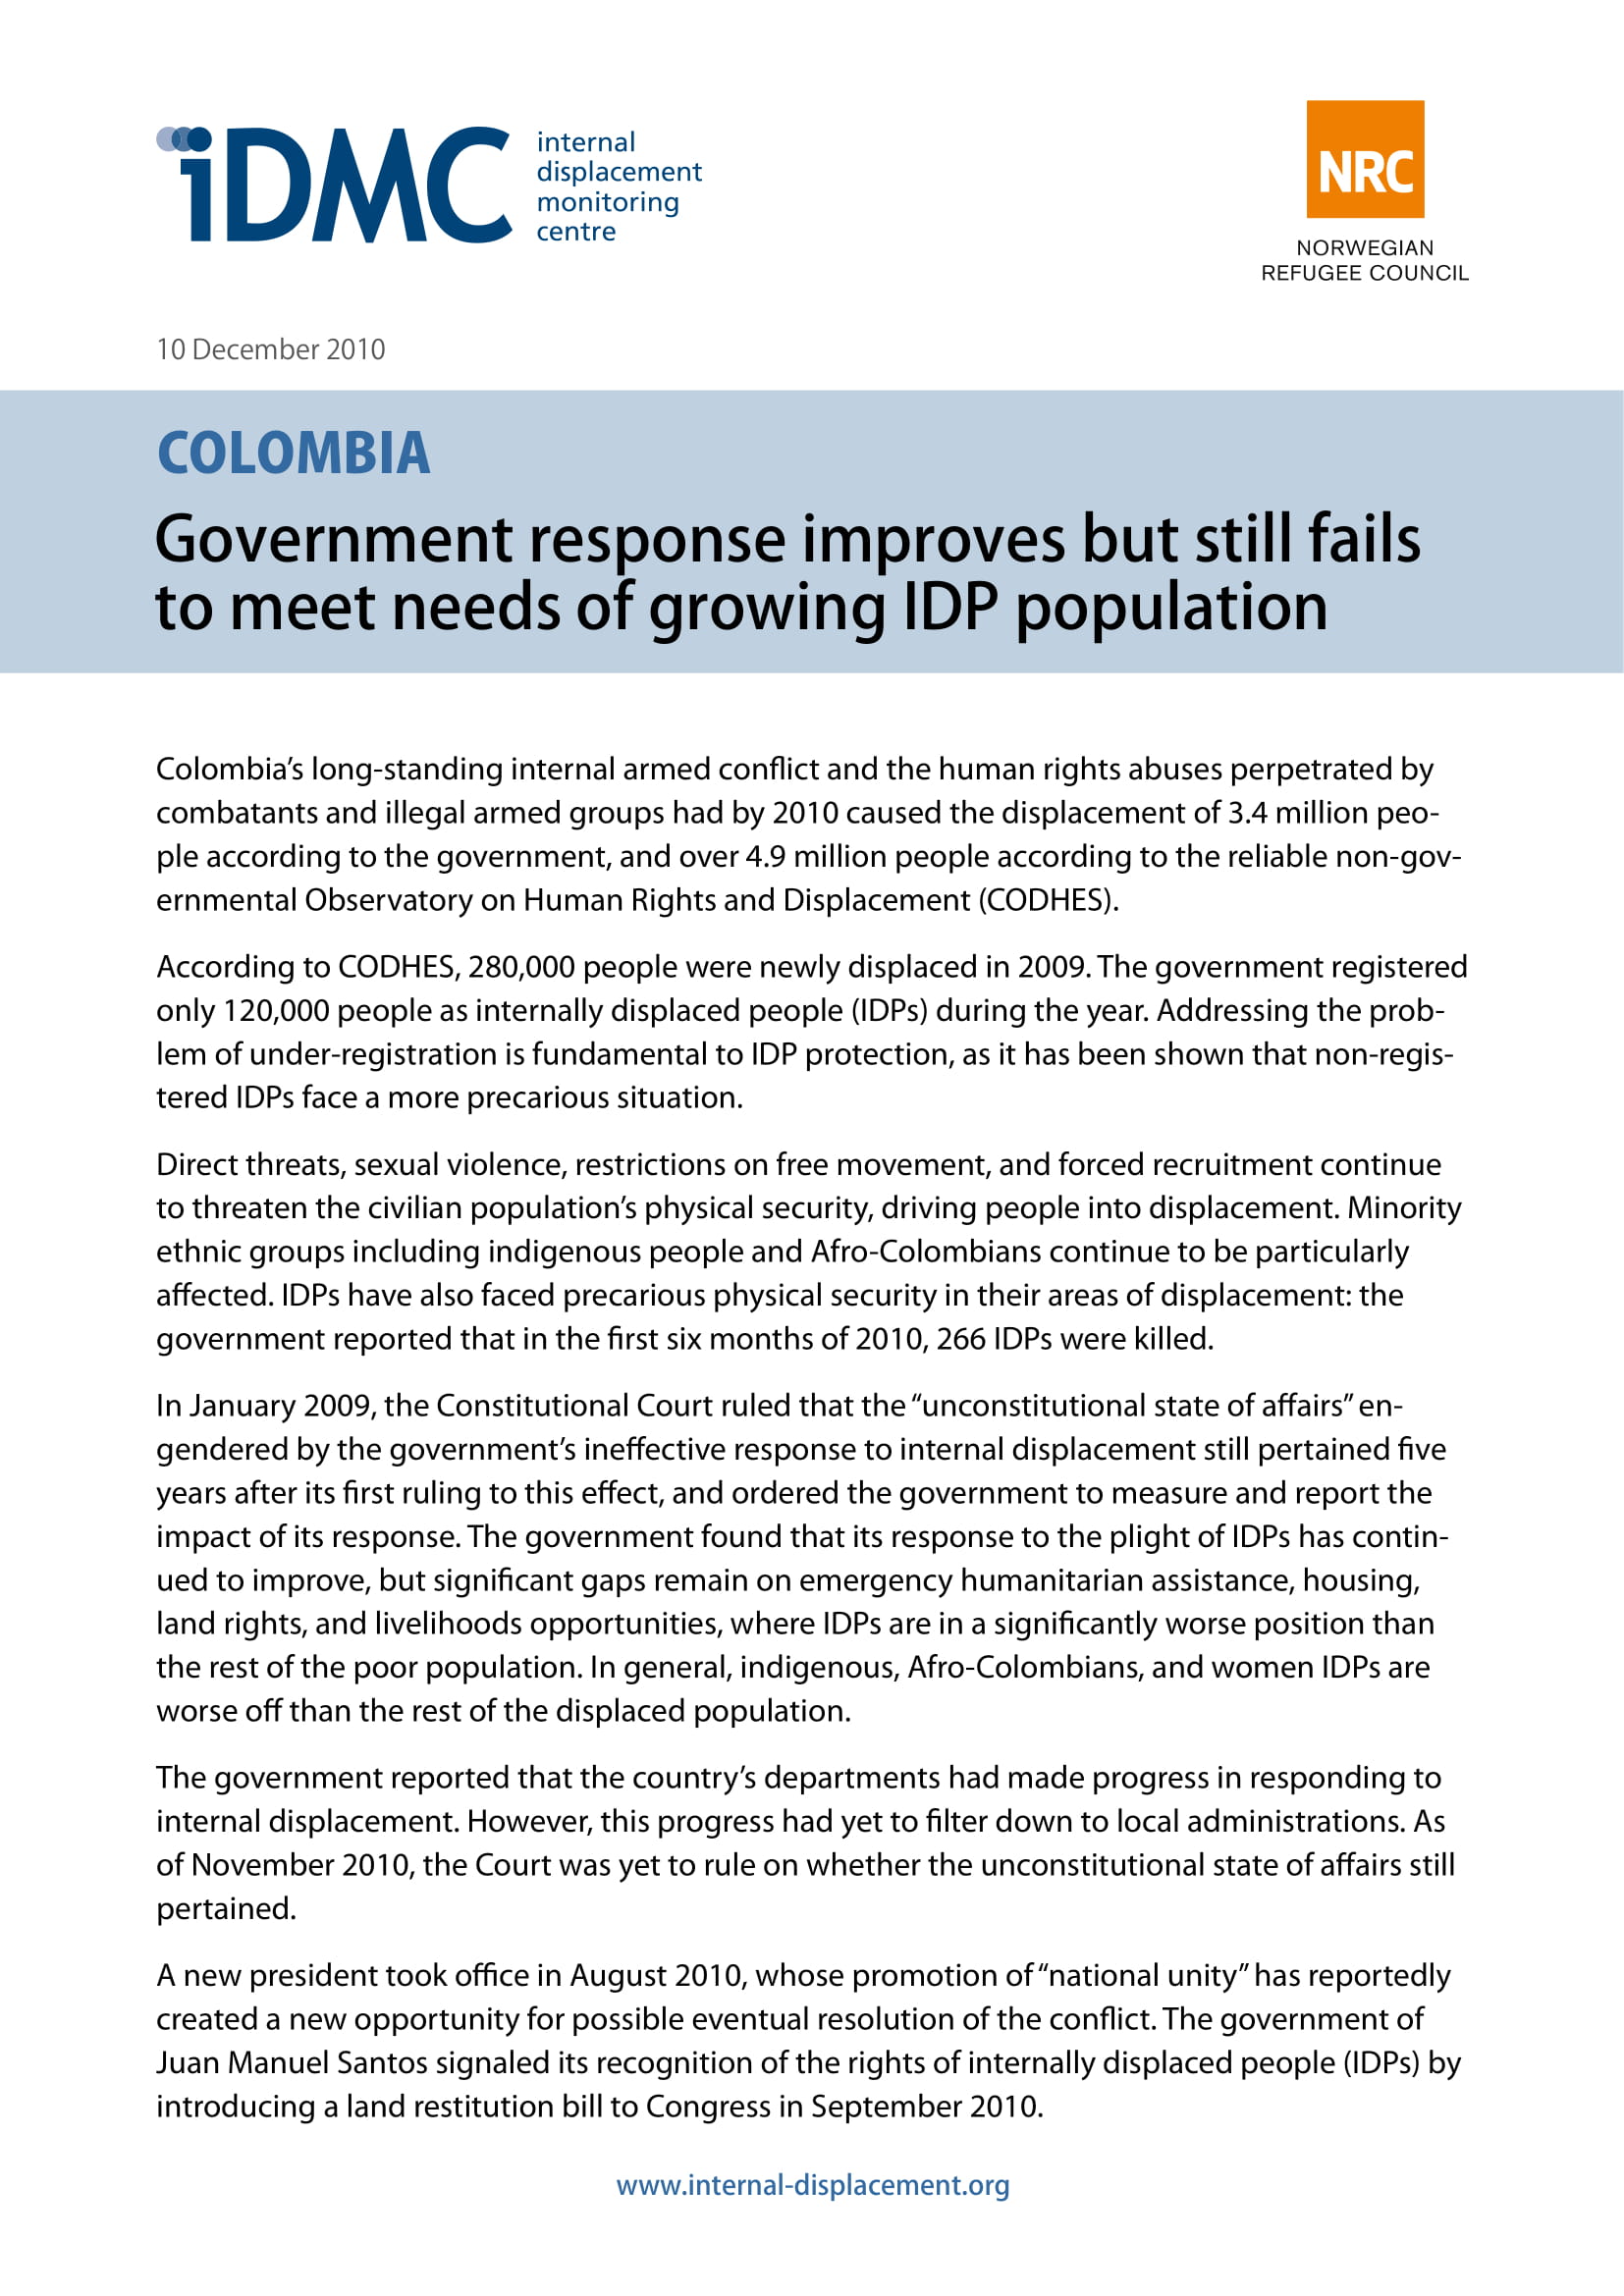 Colombia: Government response improves but still fails to meet needs of growing IDP population